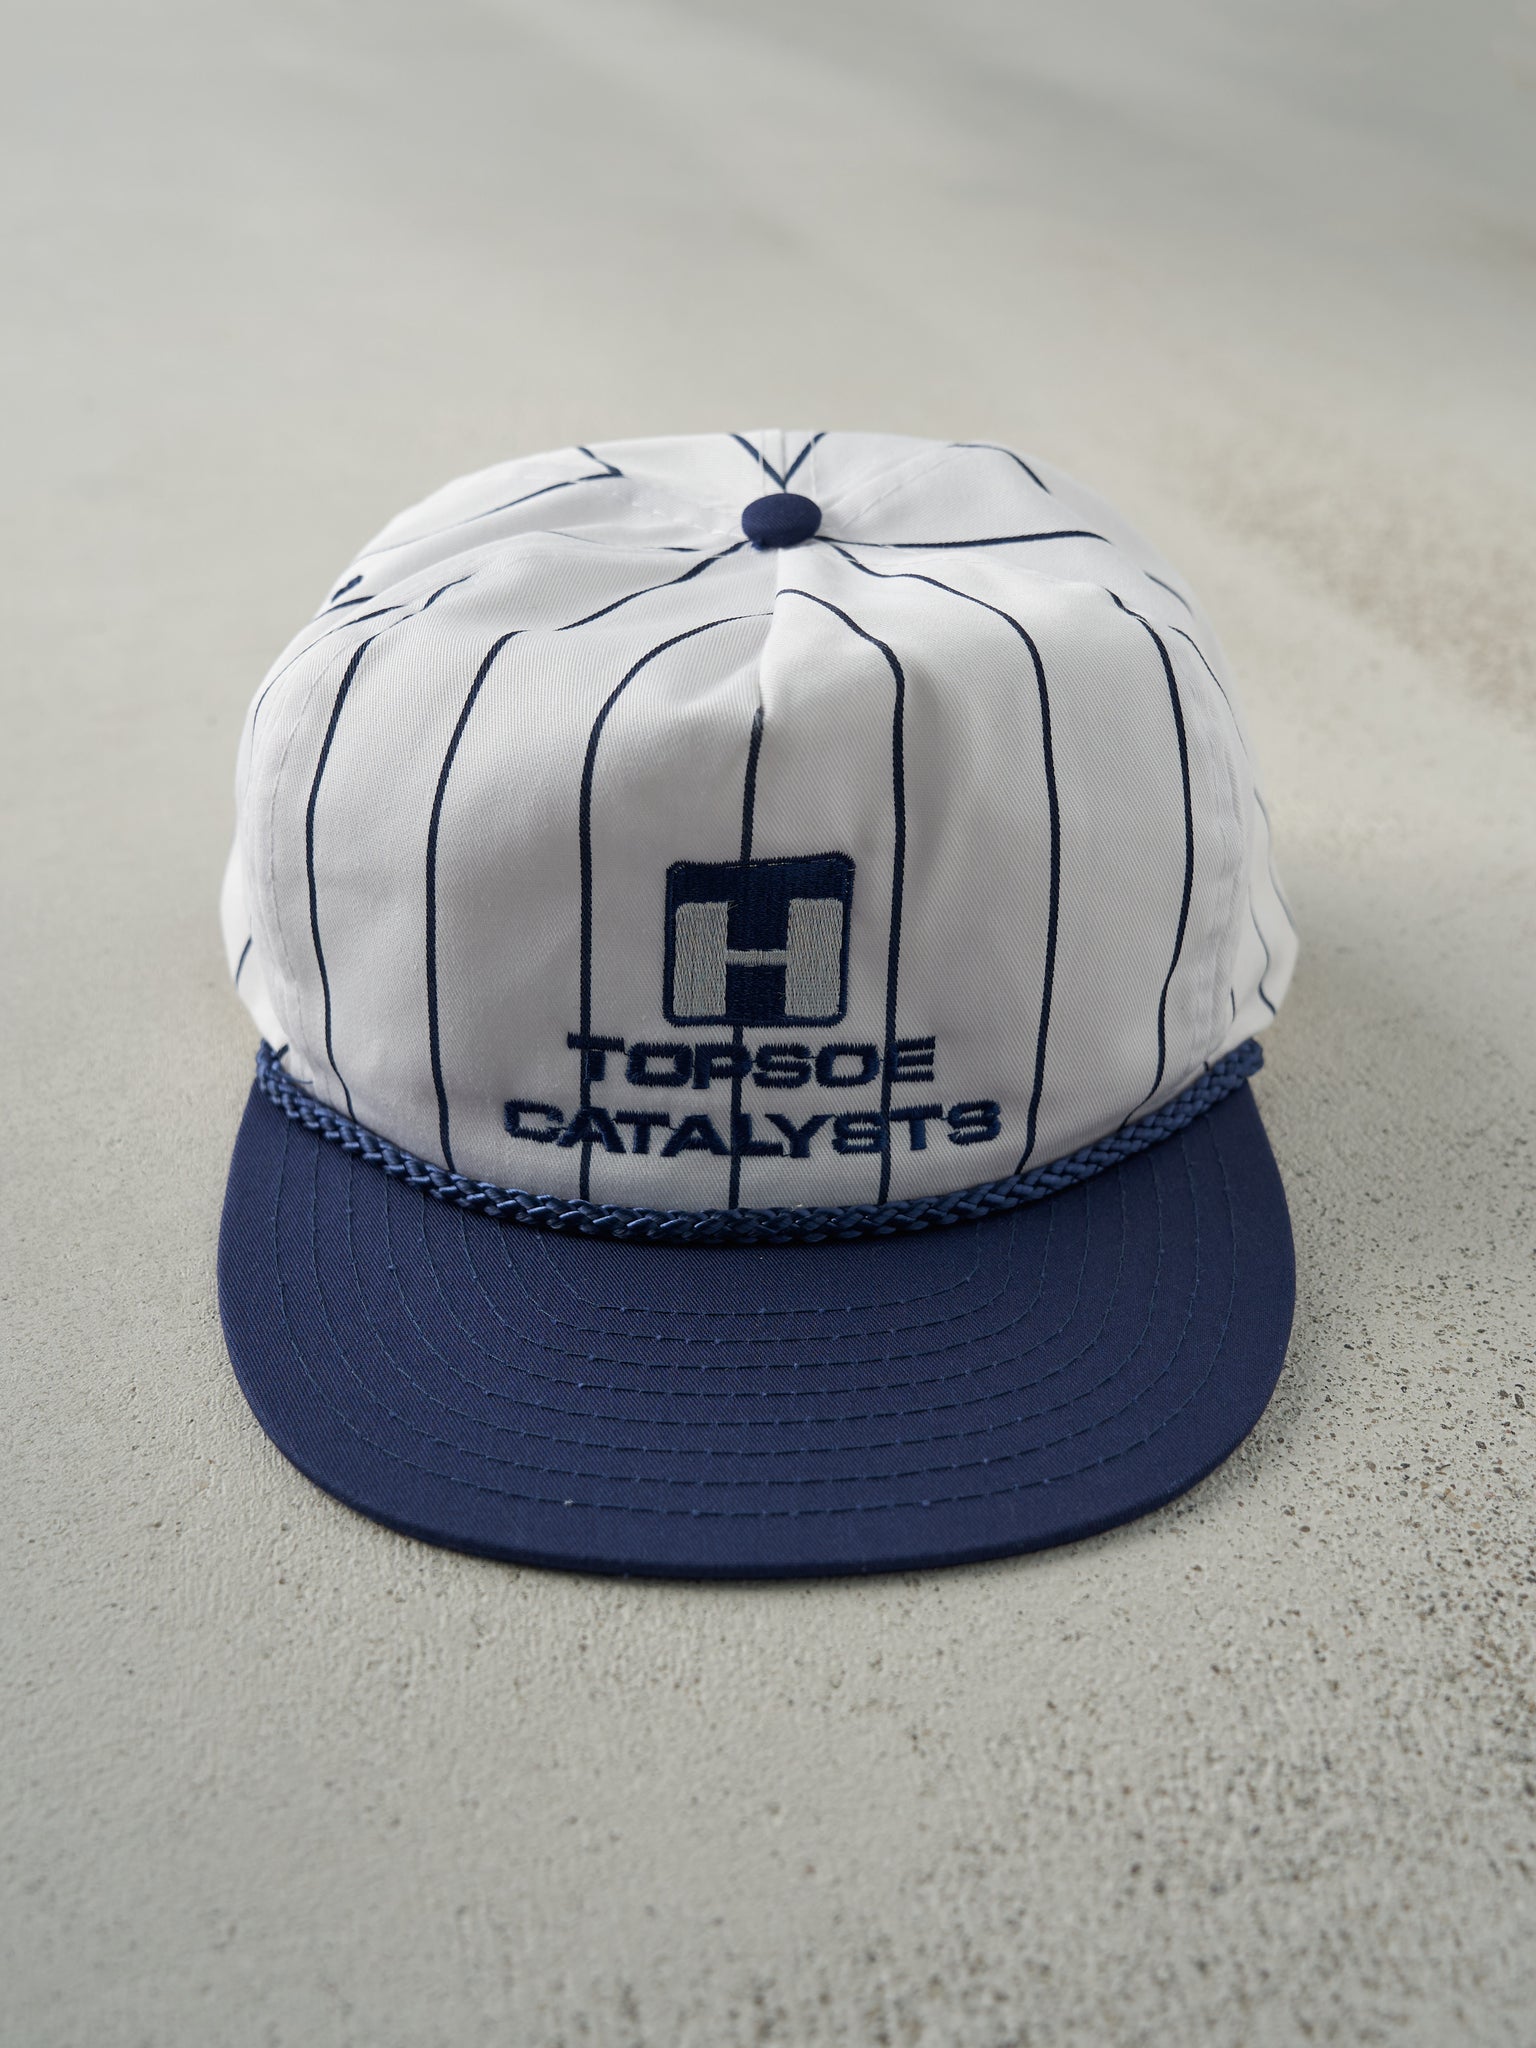 Vintage 90s Blue & White Topsoe Catalysts Striped Snapback Hat